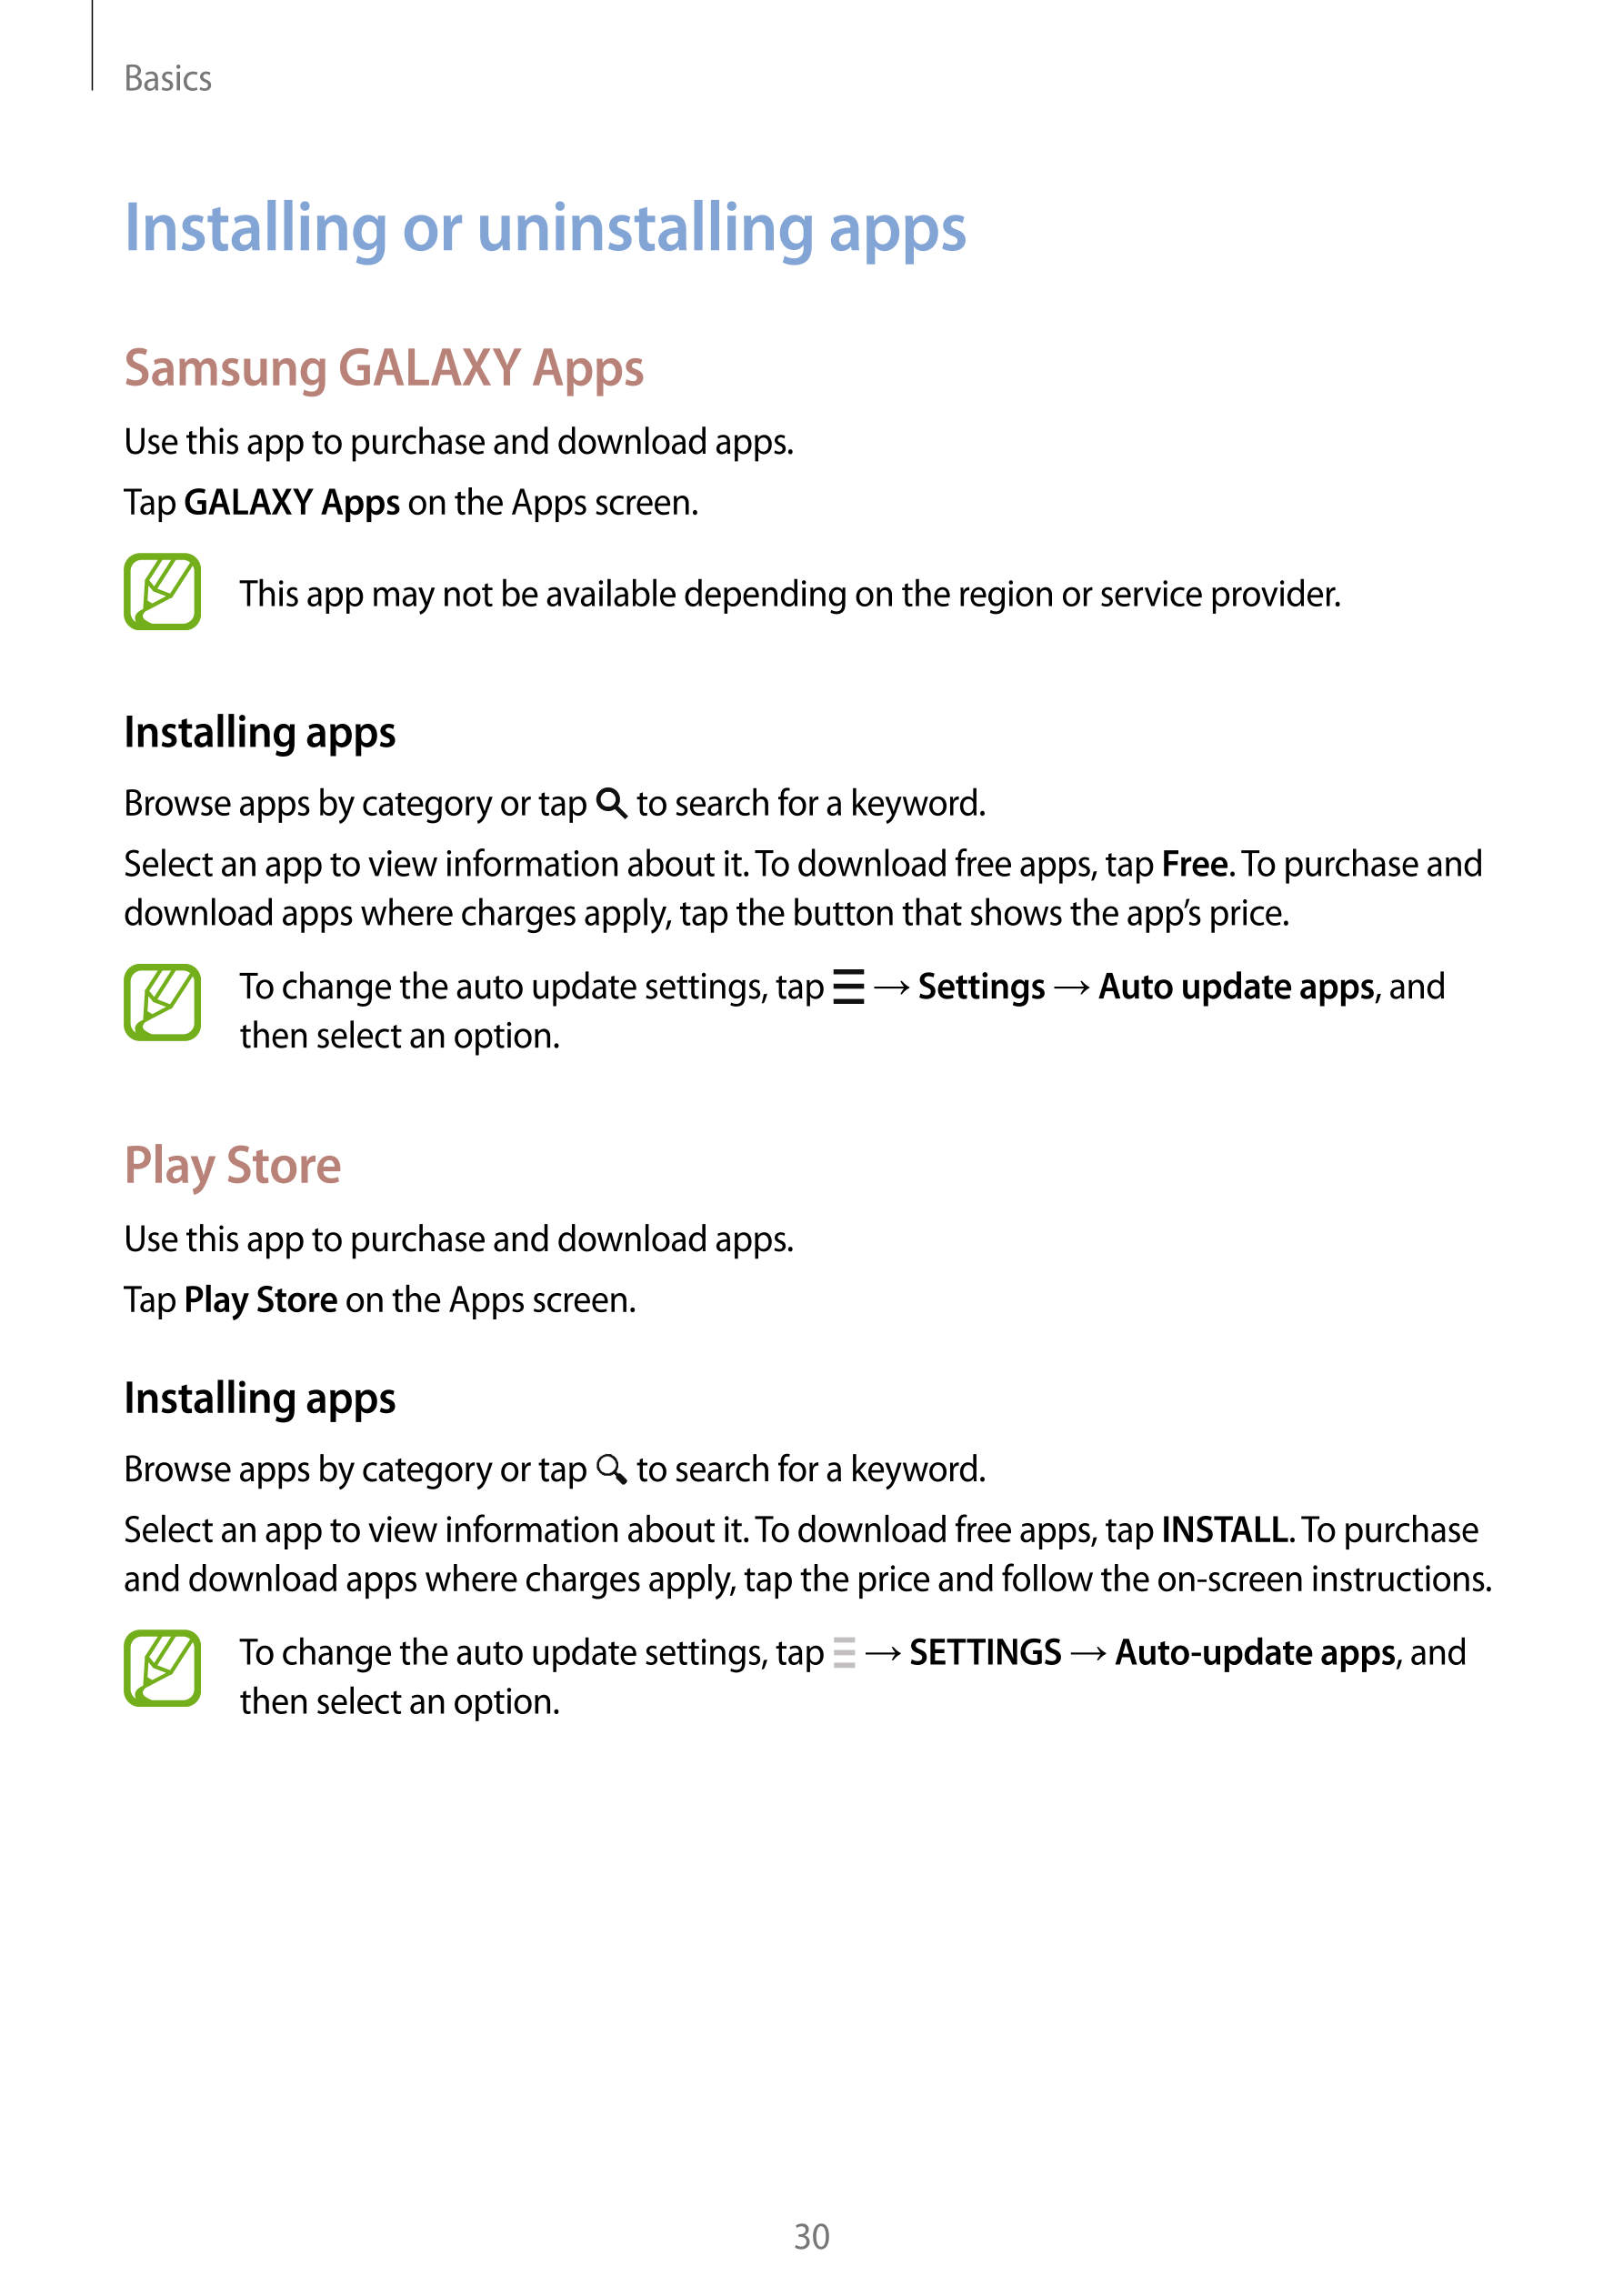 Basics
Installing or uninstalling apps
Samsung GALAXY Apps
Use this app to purchase and download apps.
Tap  GALAXY Apps on the A